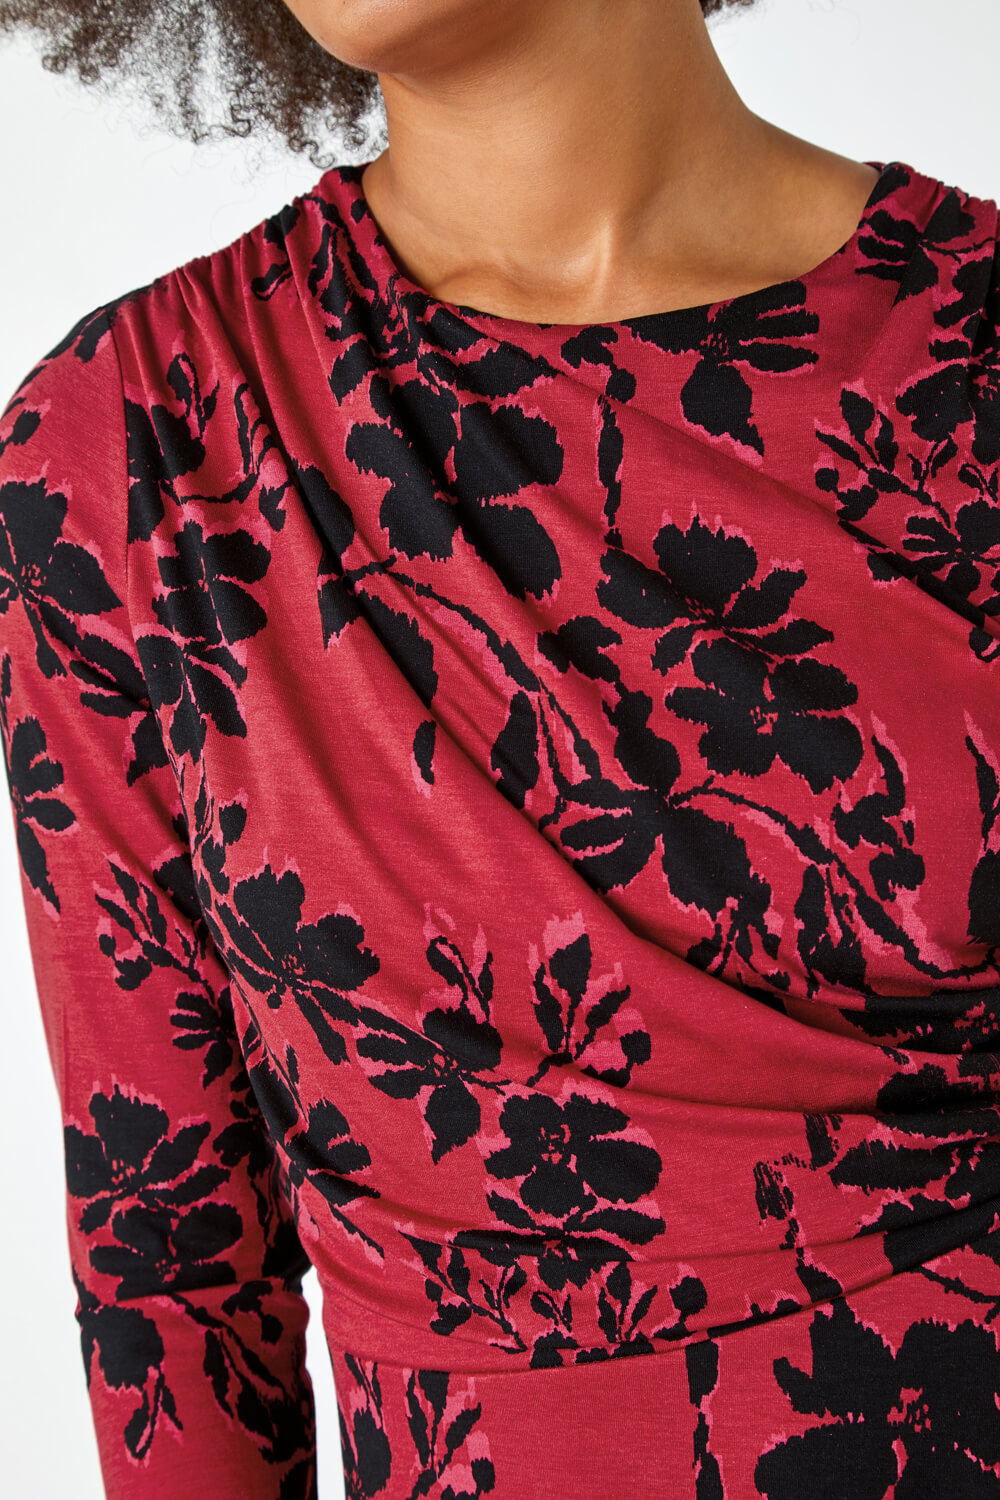 Red Floral Ruched Waist Stretch Dress, Image 5 of 5